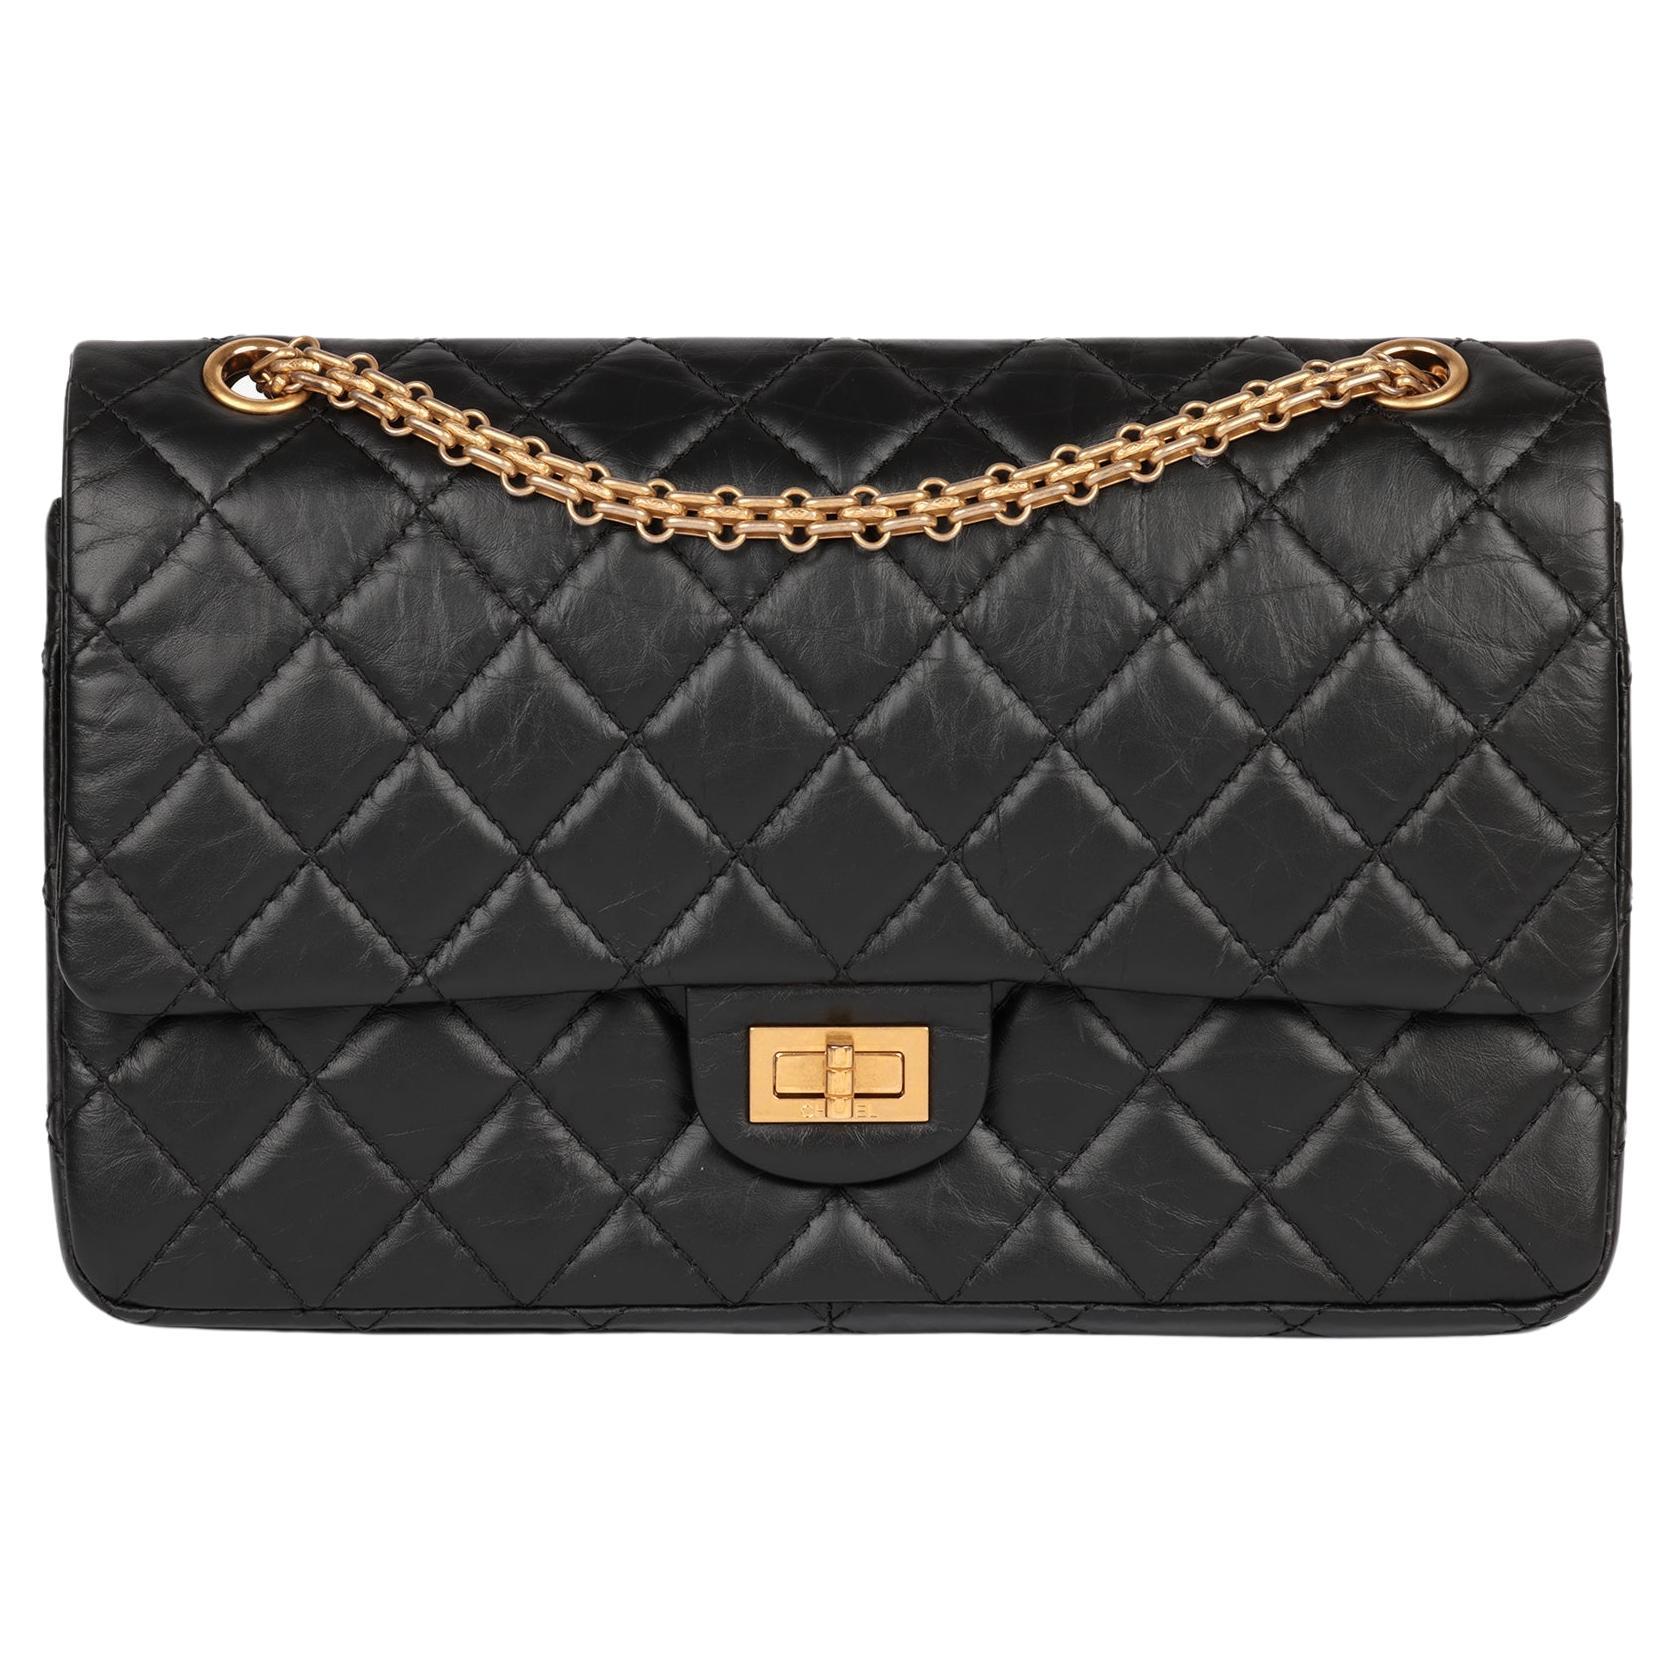 Chanel Black Quilted Crinkled Calfskin Leather 226 2.55 Reissue Double Flap Bag For Sale